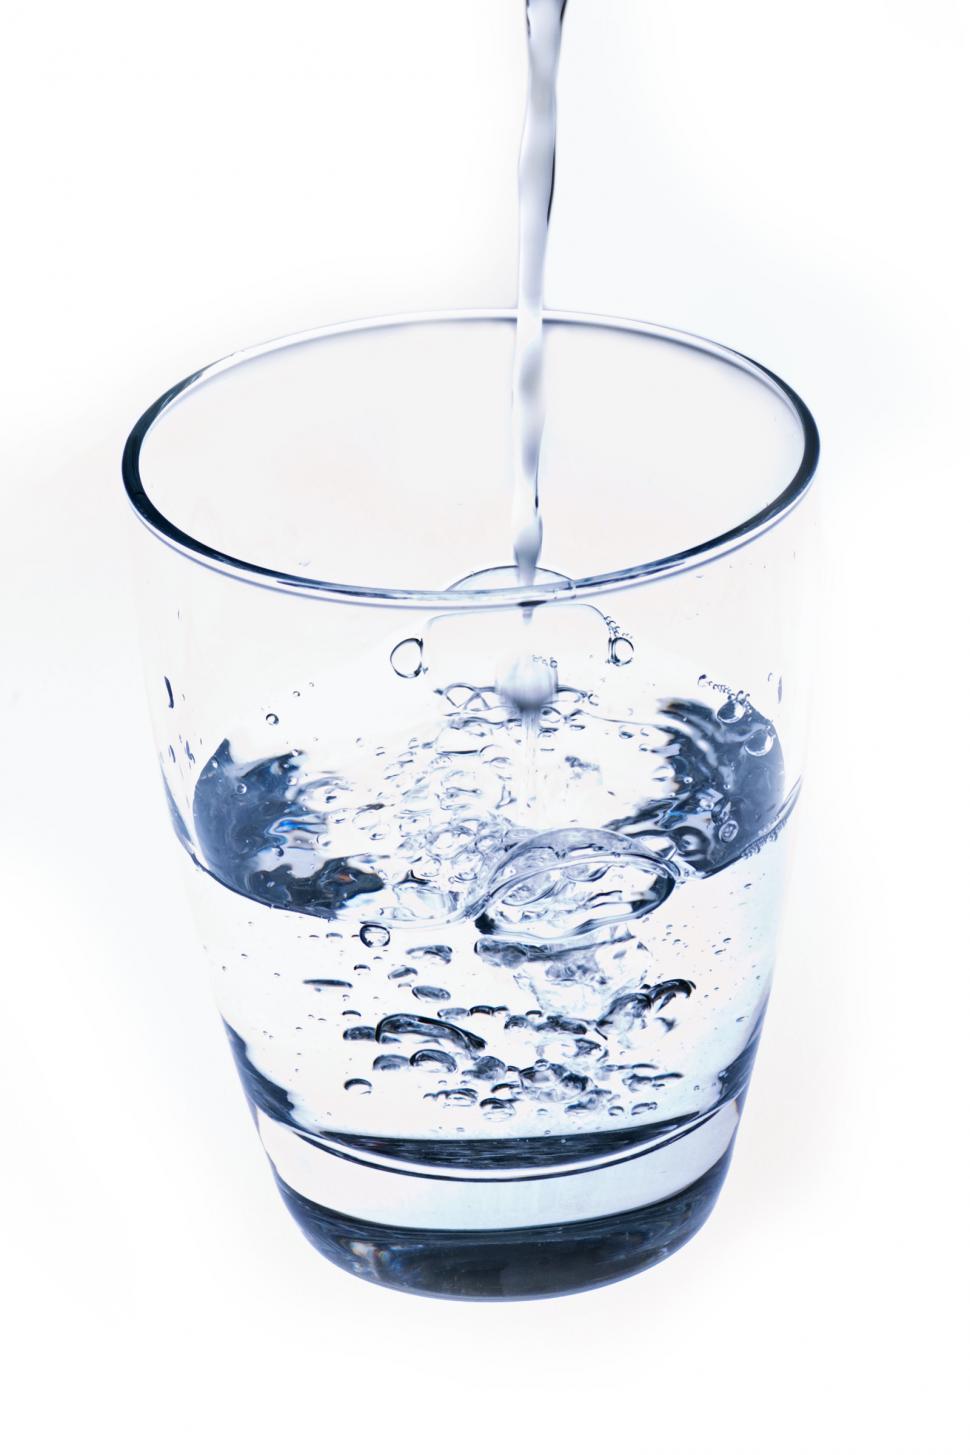 Free Image of Glass of Water 